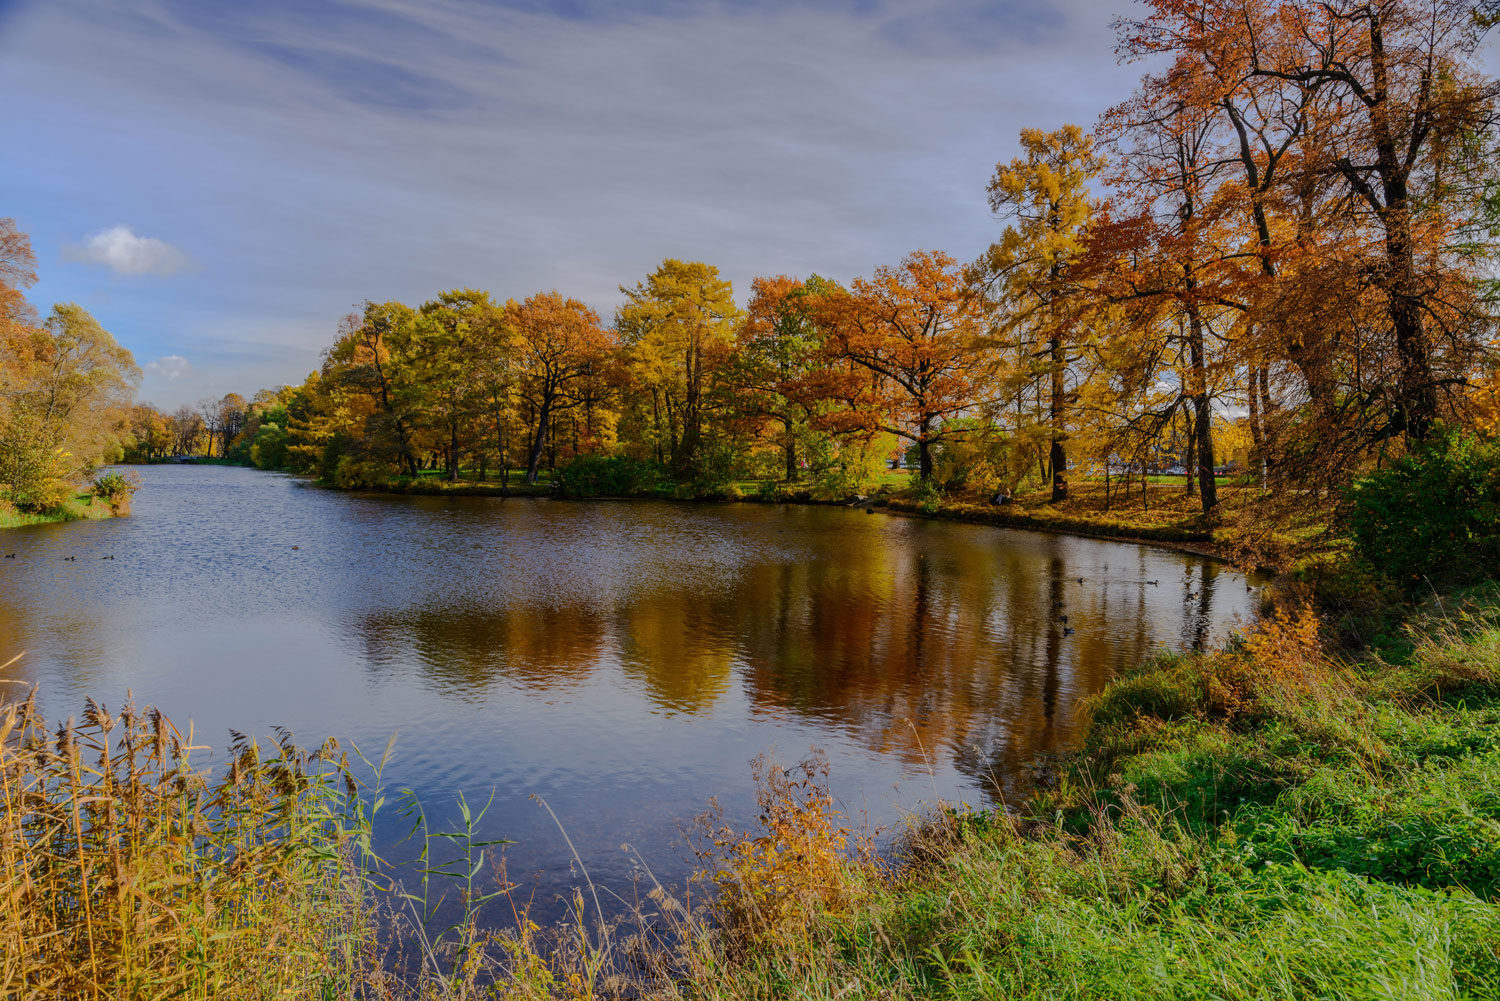 One of the lakes in Kirov Park, image found at https://elaginpark.org/nature/flora-i-fauna/prudy/